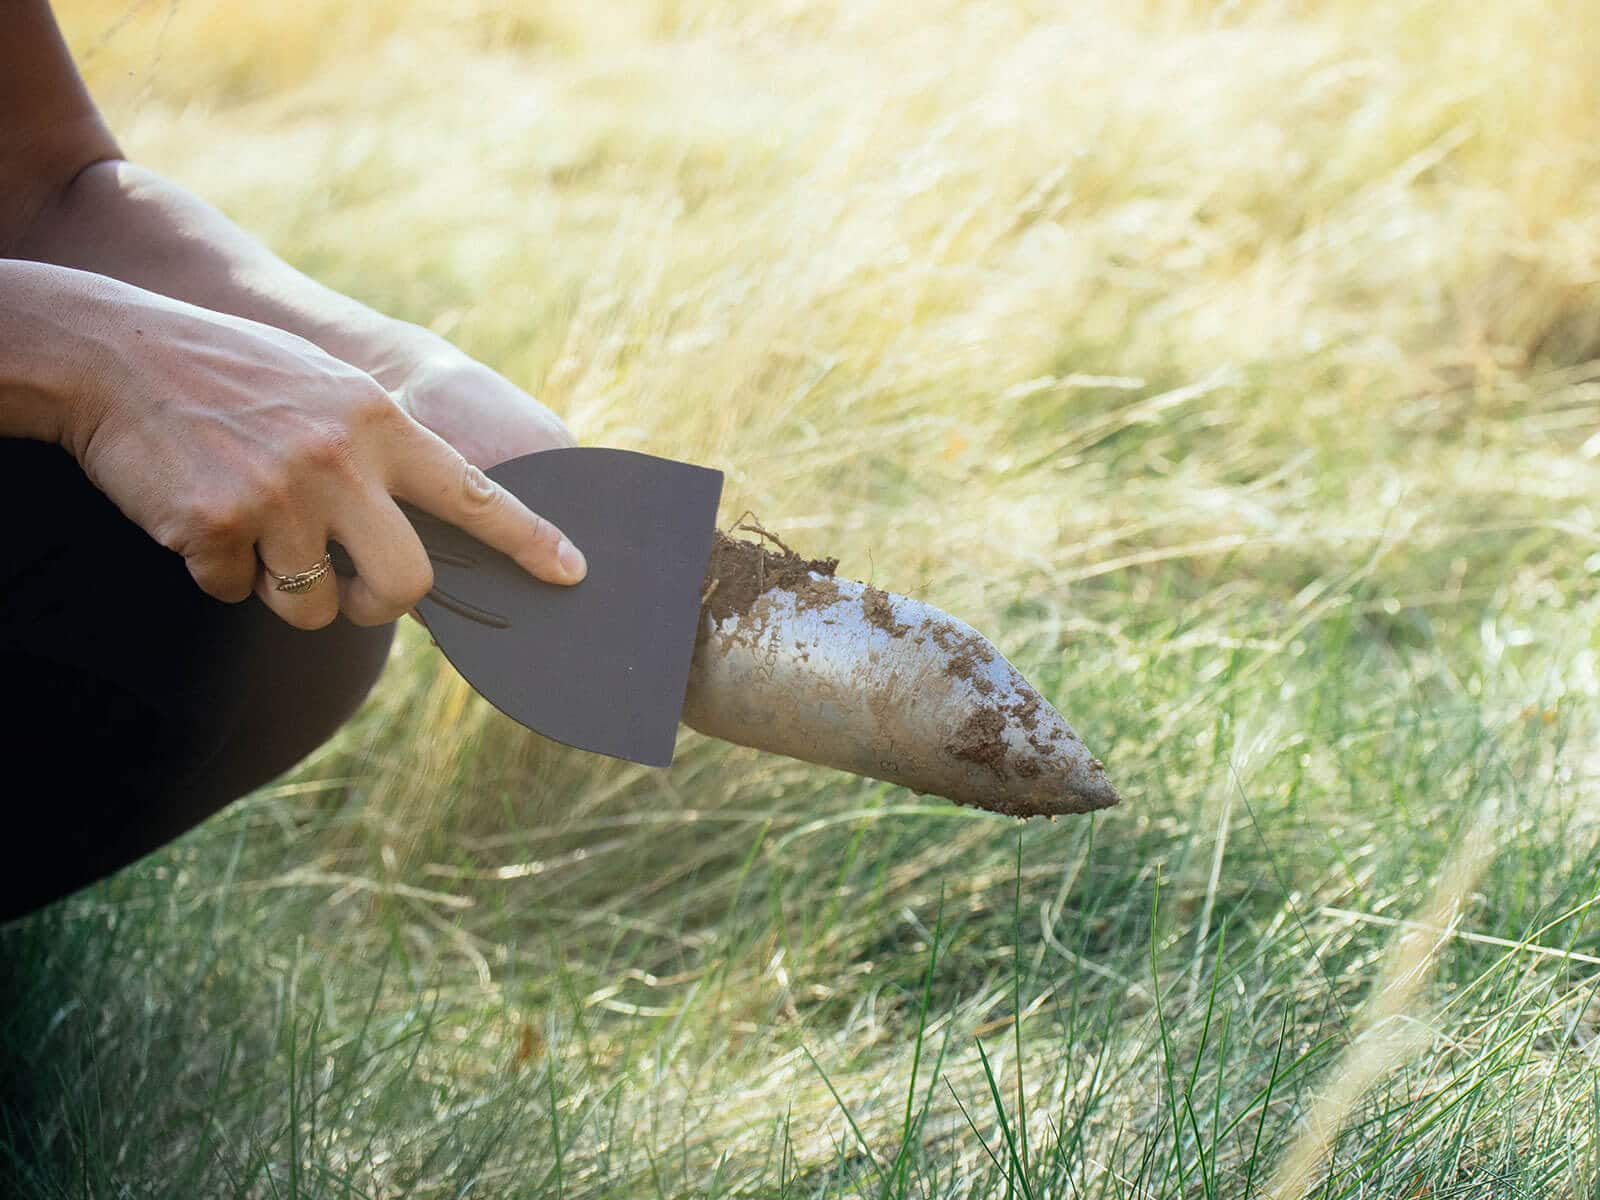 Putty knife scraping caked-on dirt off a garden trowel